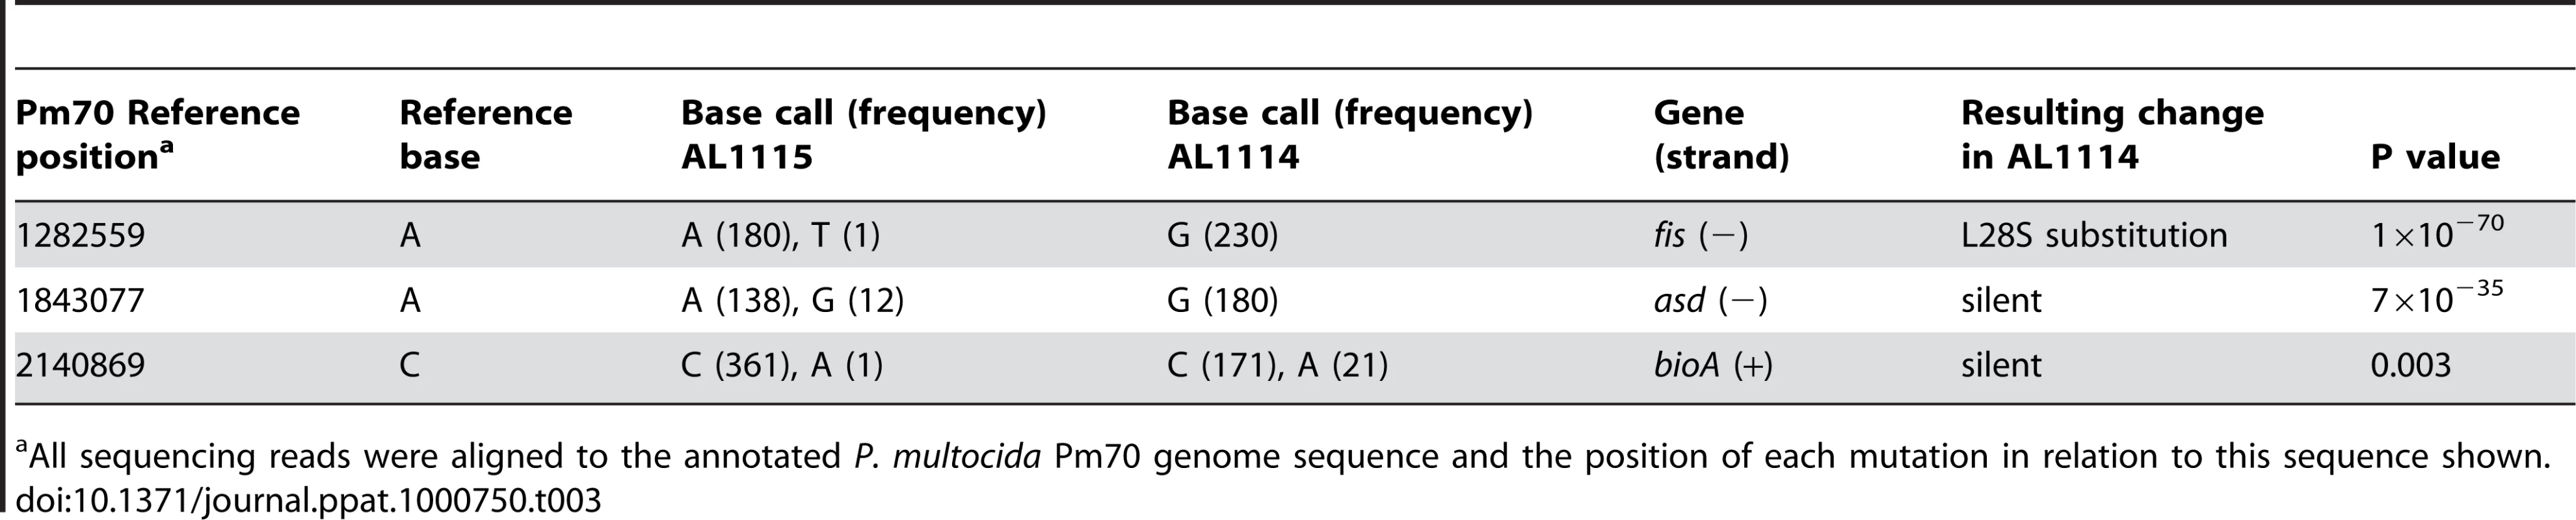 Sequence differences identified by whole-genome Illumina short read sequencing between the acapsular strain AL1114 and the paired capsulated strain AL1115.